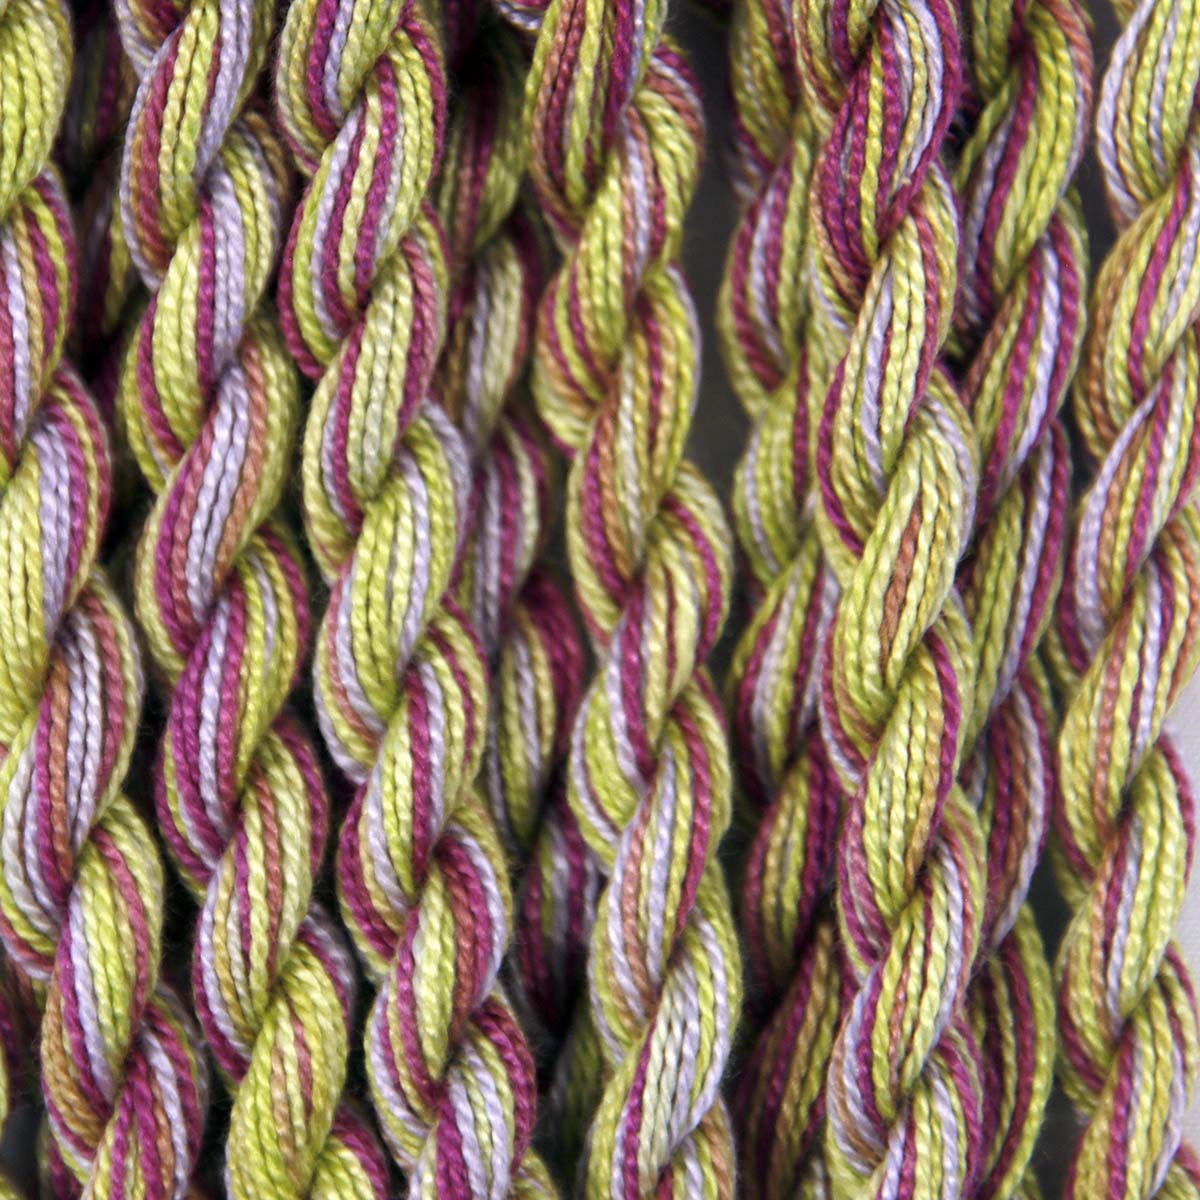 www.colourstreams.com.au Colour Streams Hand Dyed Swww.colourstreams.com.au Colour Streams Hand Dyed Cotton Threads Cotto Strands Slow Stitch Embroidery Textile Arts Fibre DL 51 Blushing Fig Purples Pinks Greens